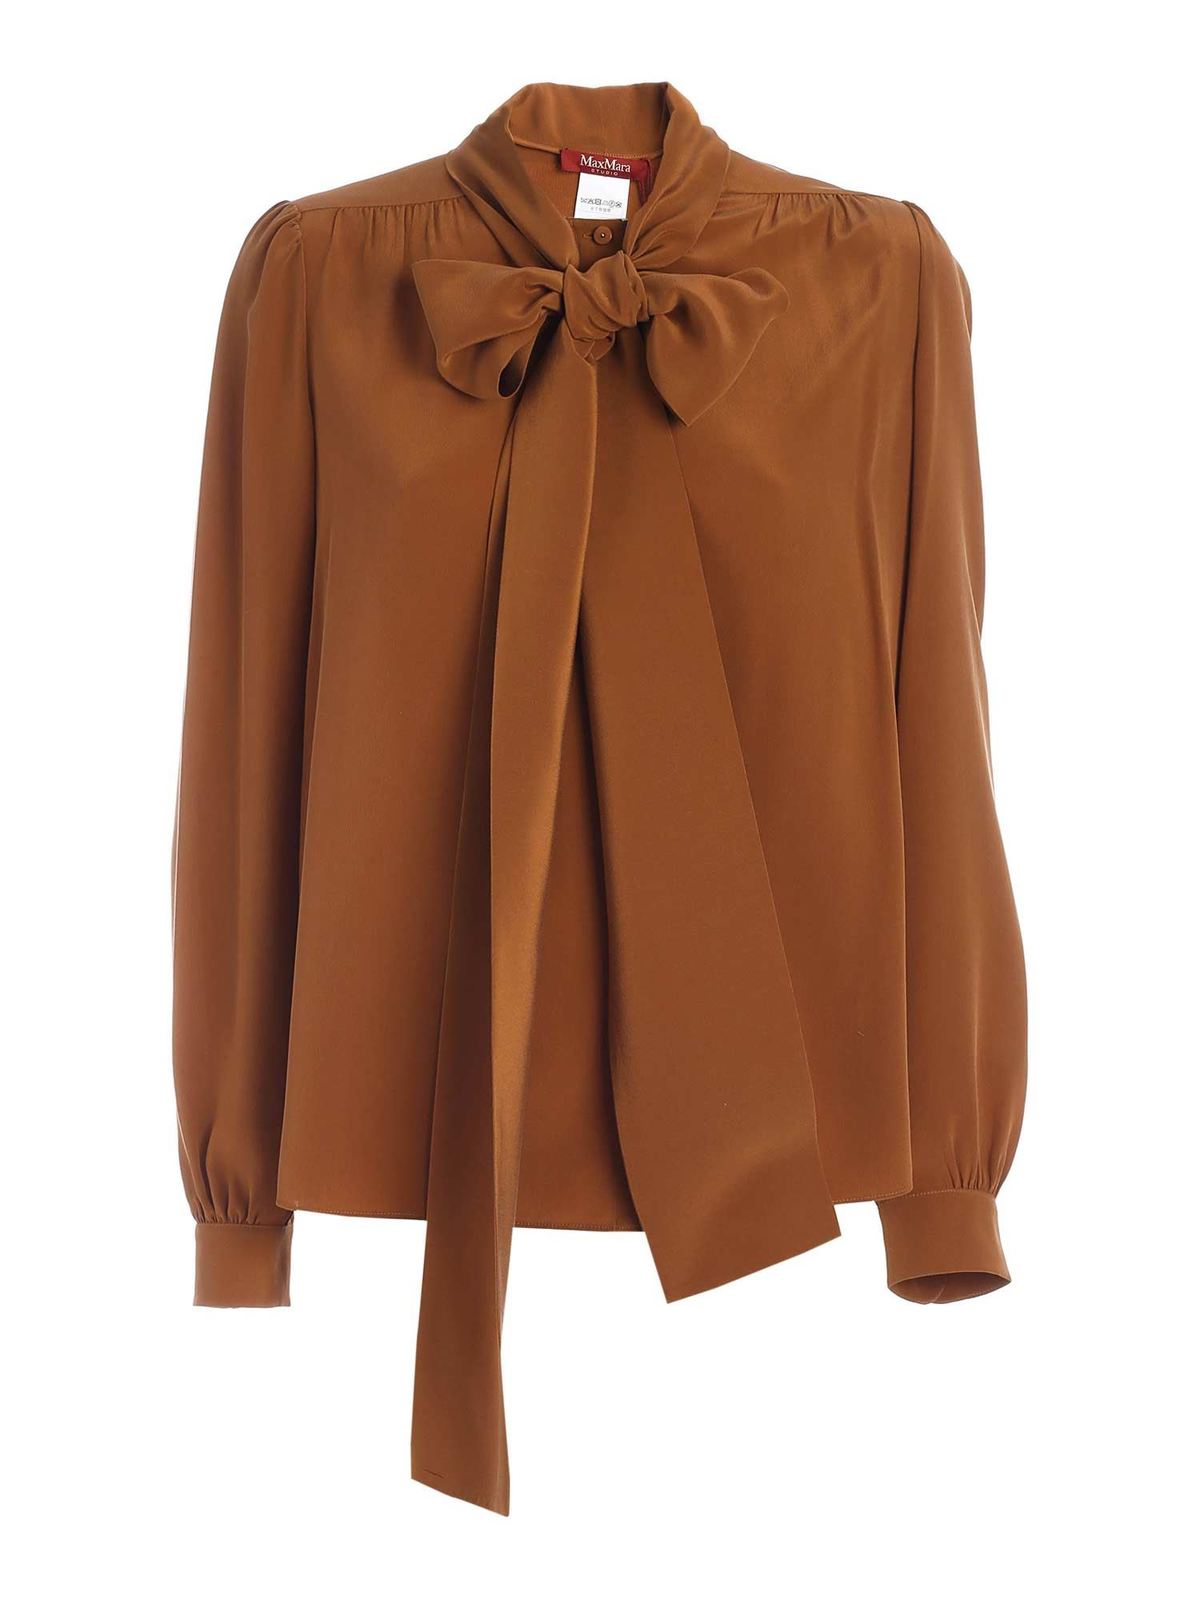 MAX MARA MIELE SHIRT IN LEATHER COLOR